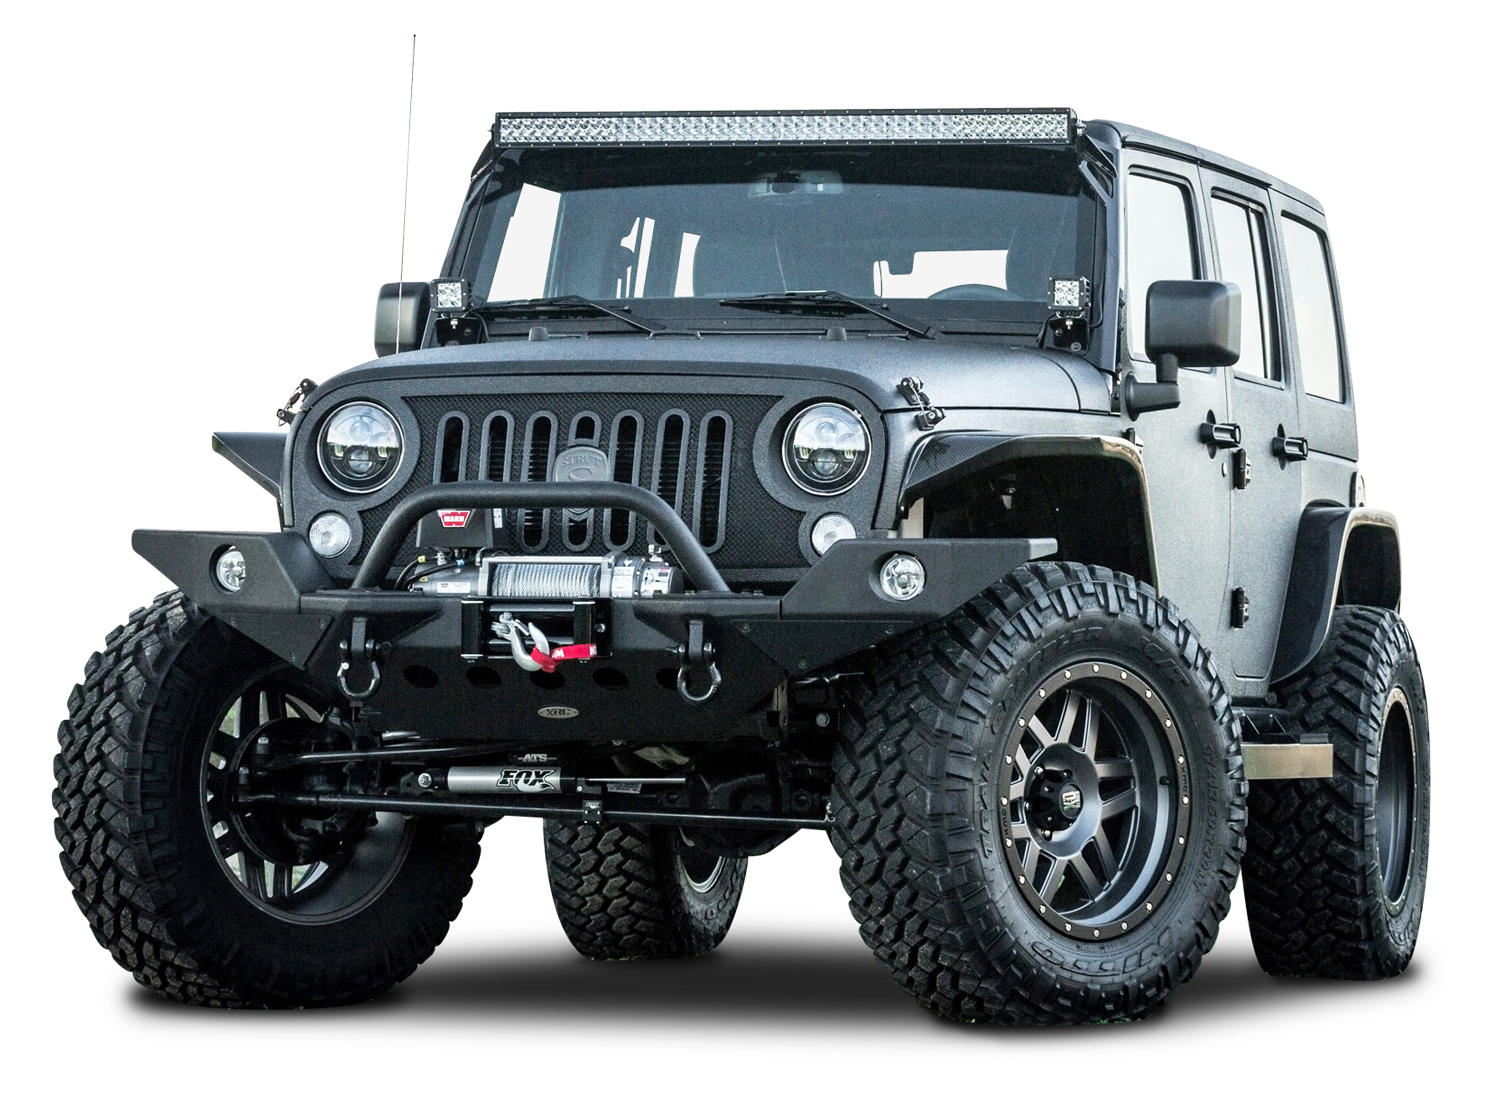 A Black Jeep With Large Tires